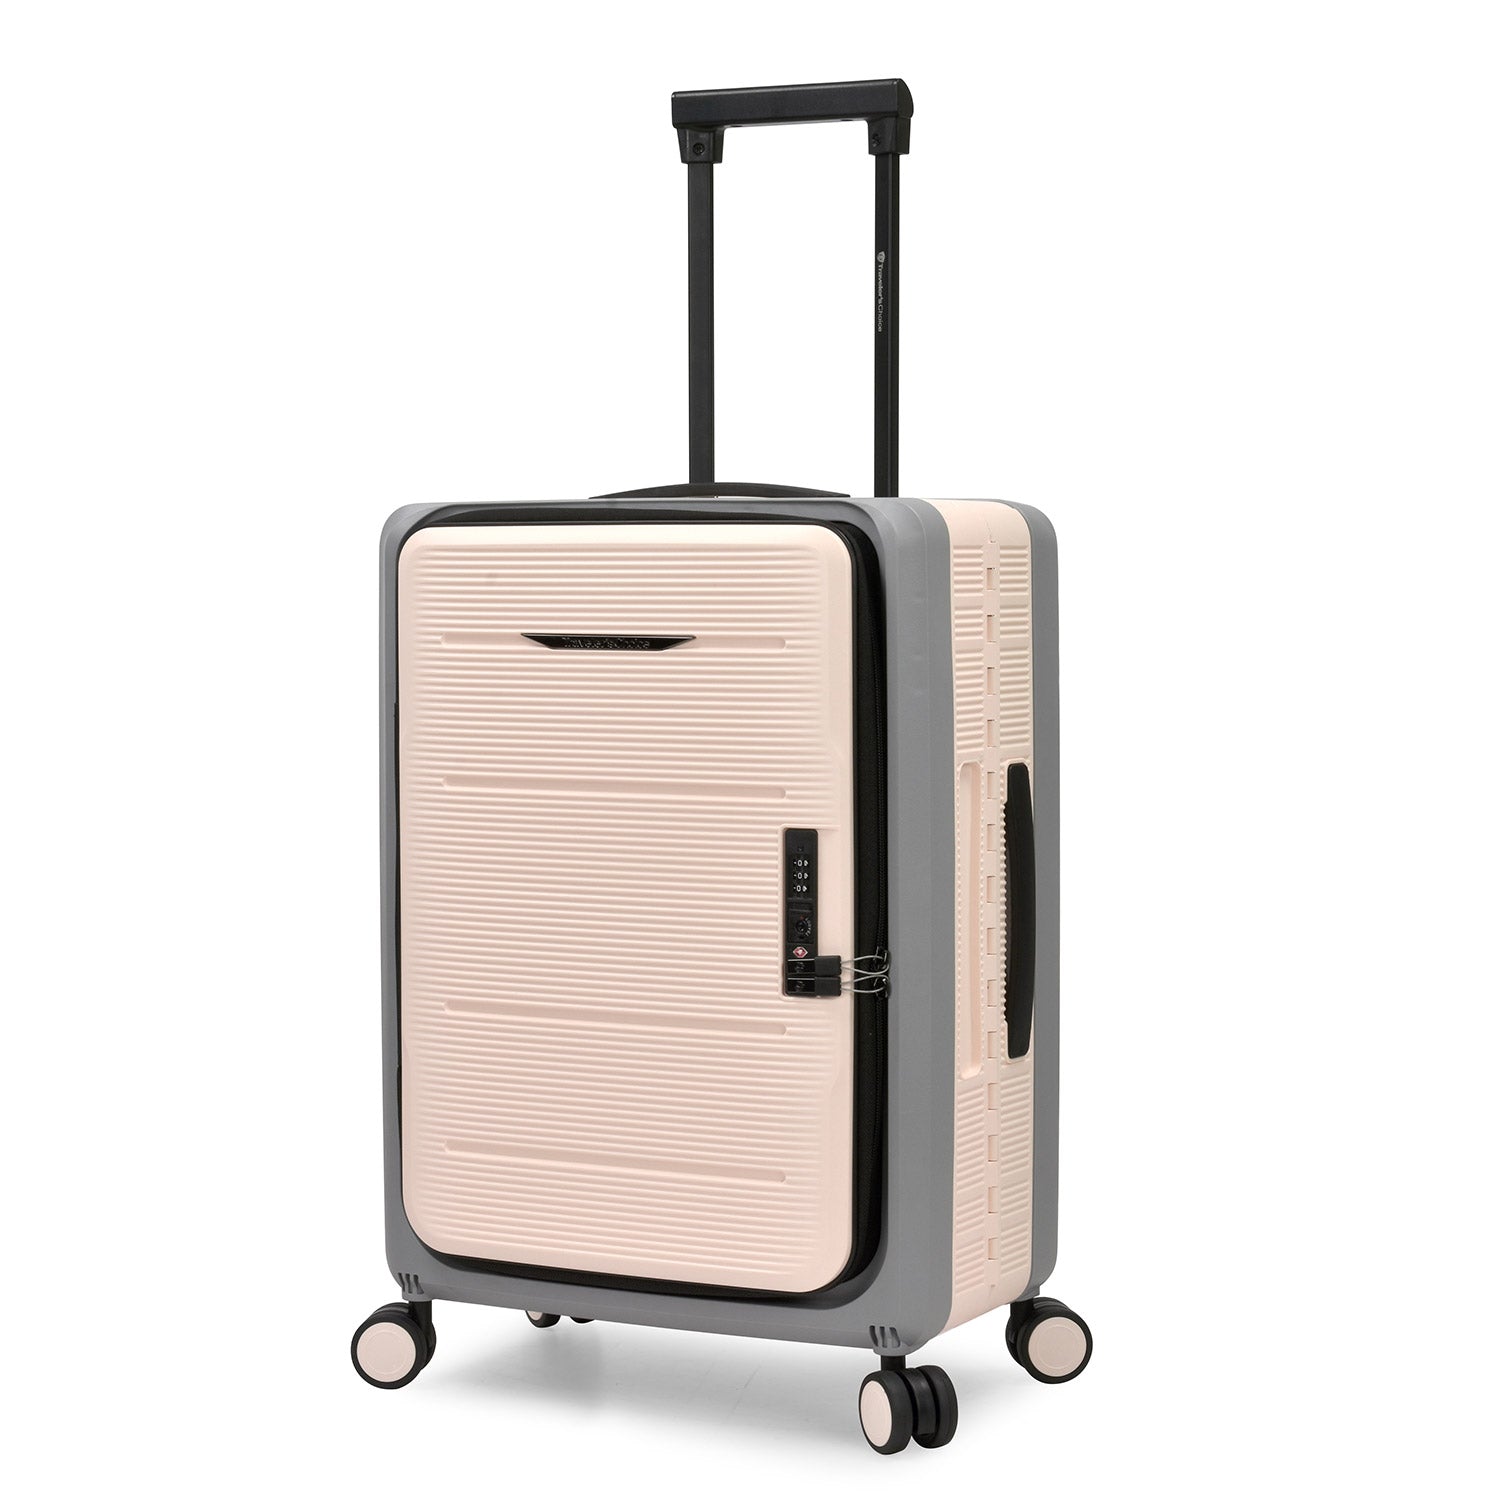 Collapsible Luggage Collection